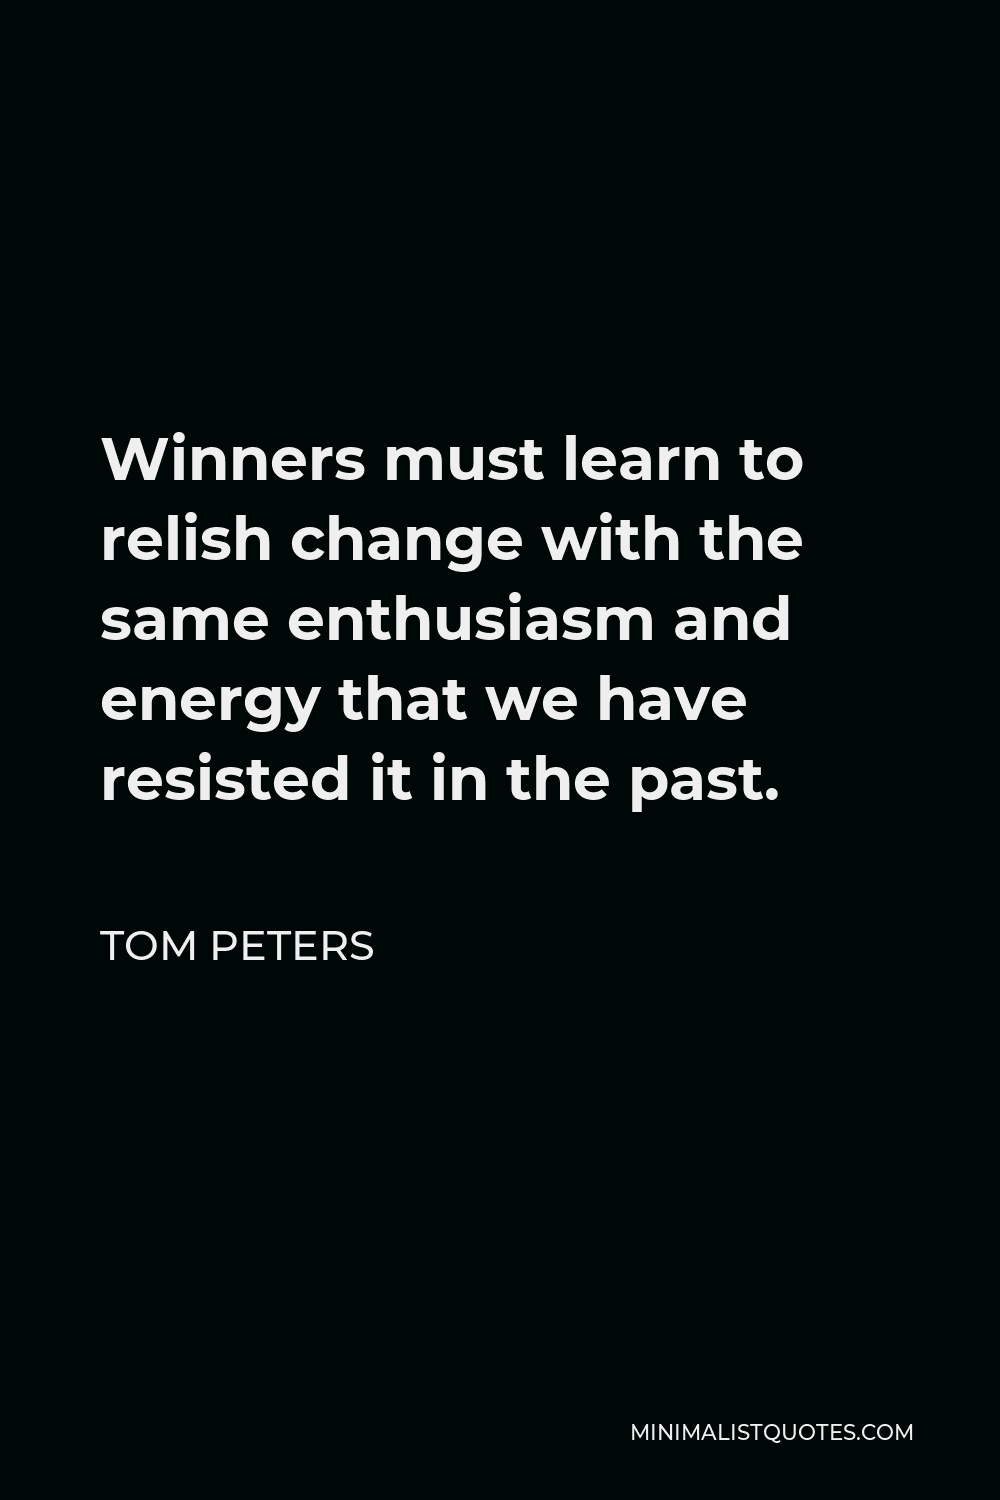 Tom Peters Quote - Winners must learn to relish change with the same enthusiasm and energy that we have resisted it in the past.